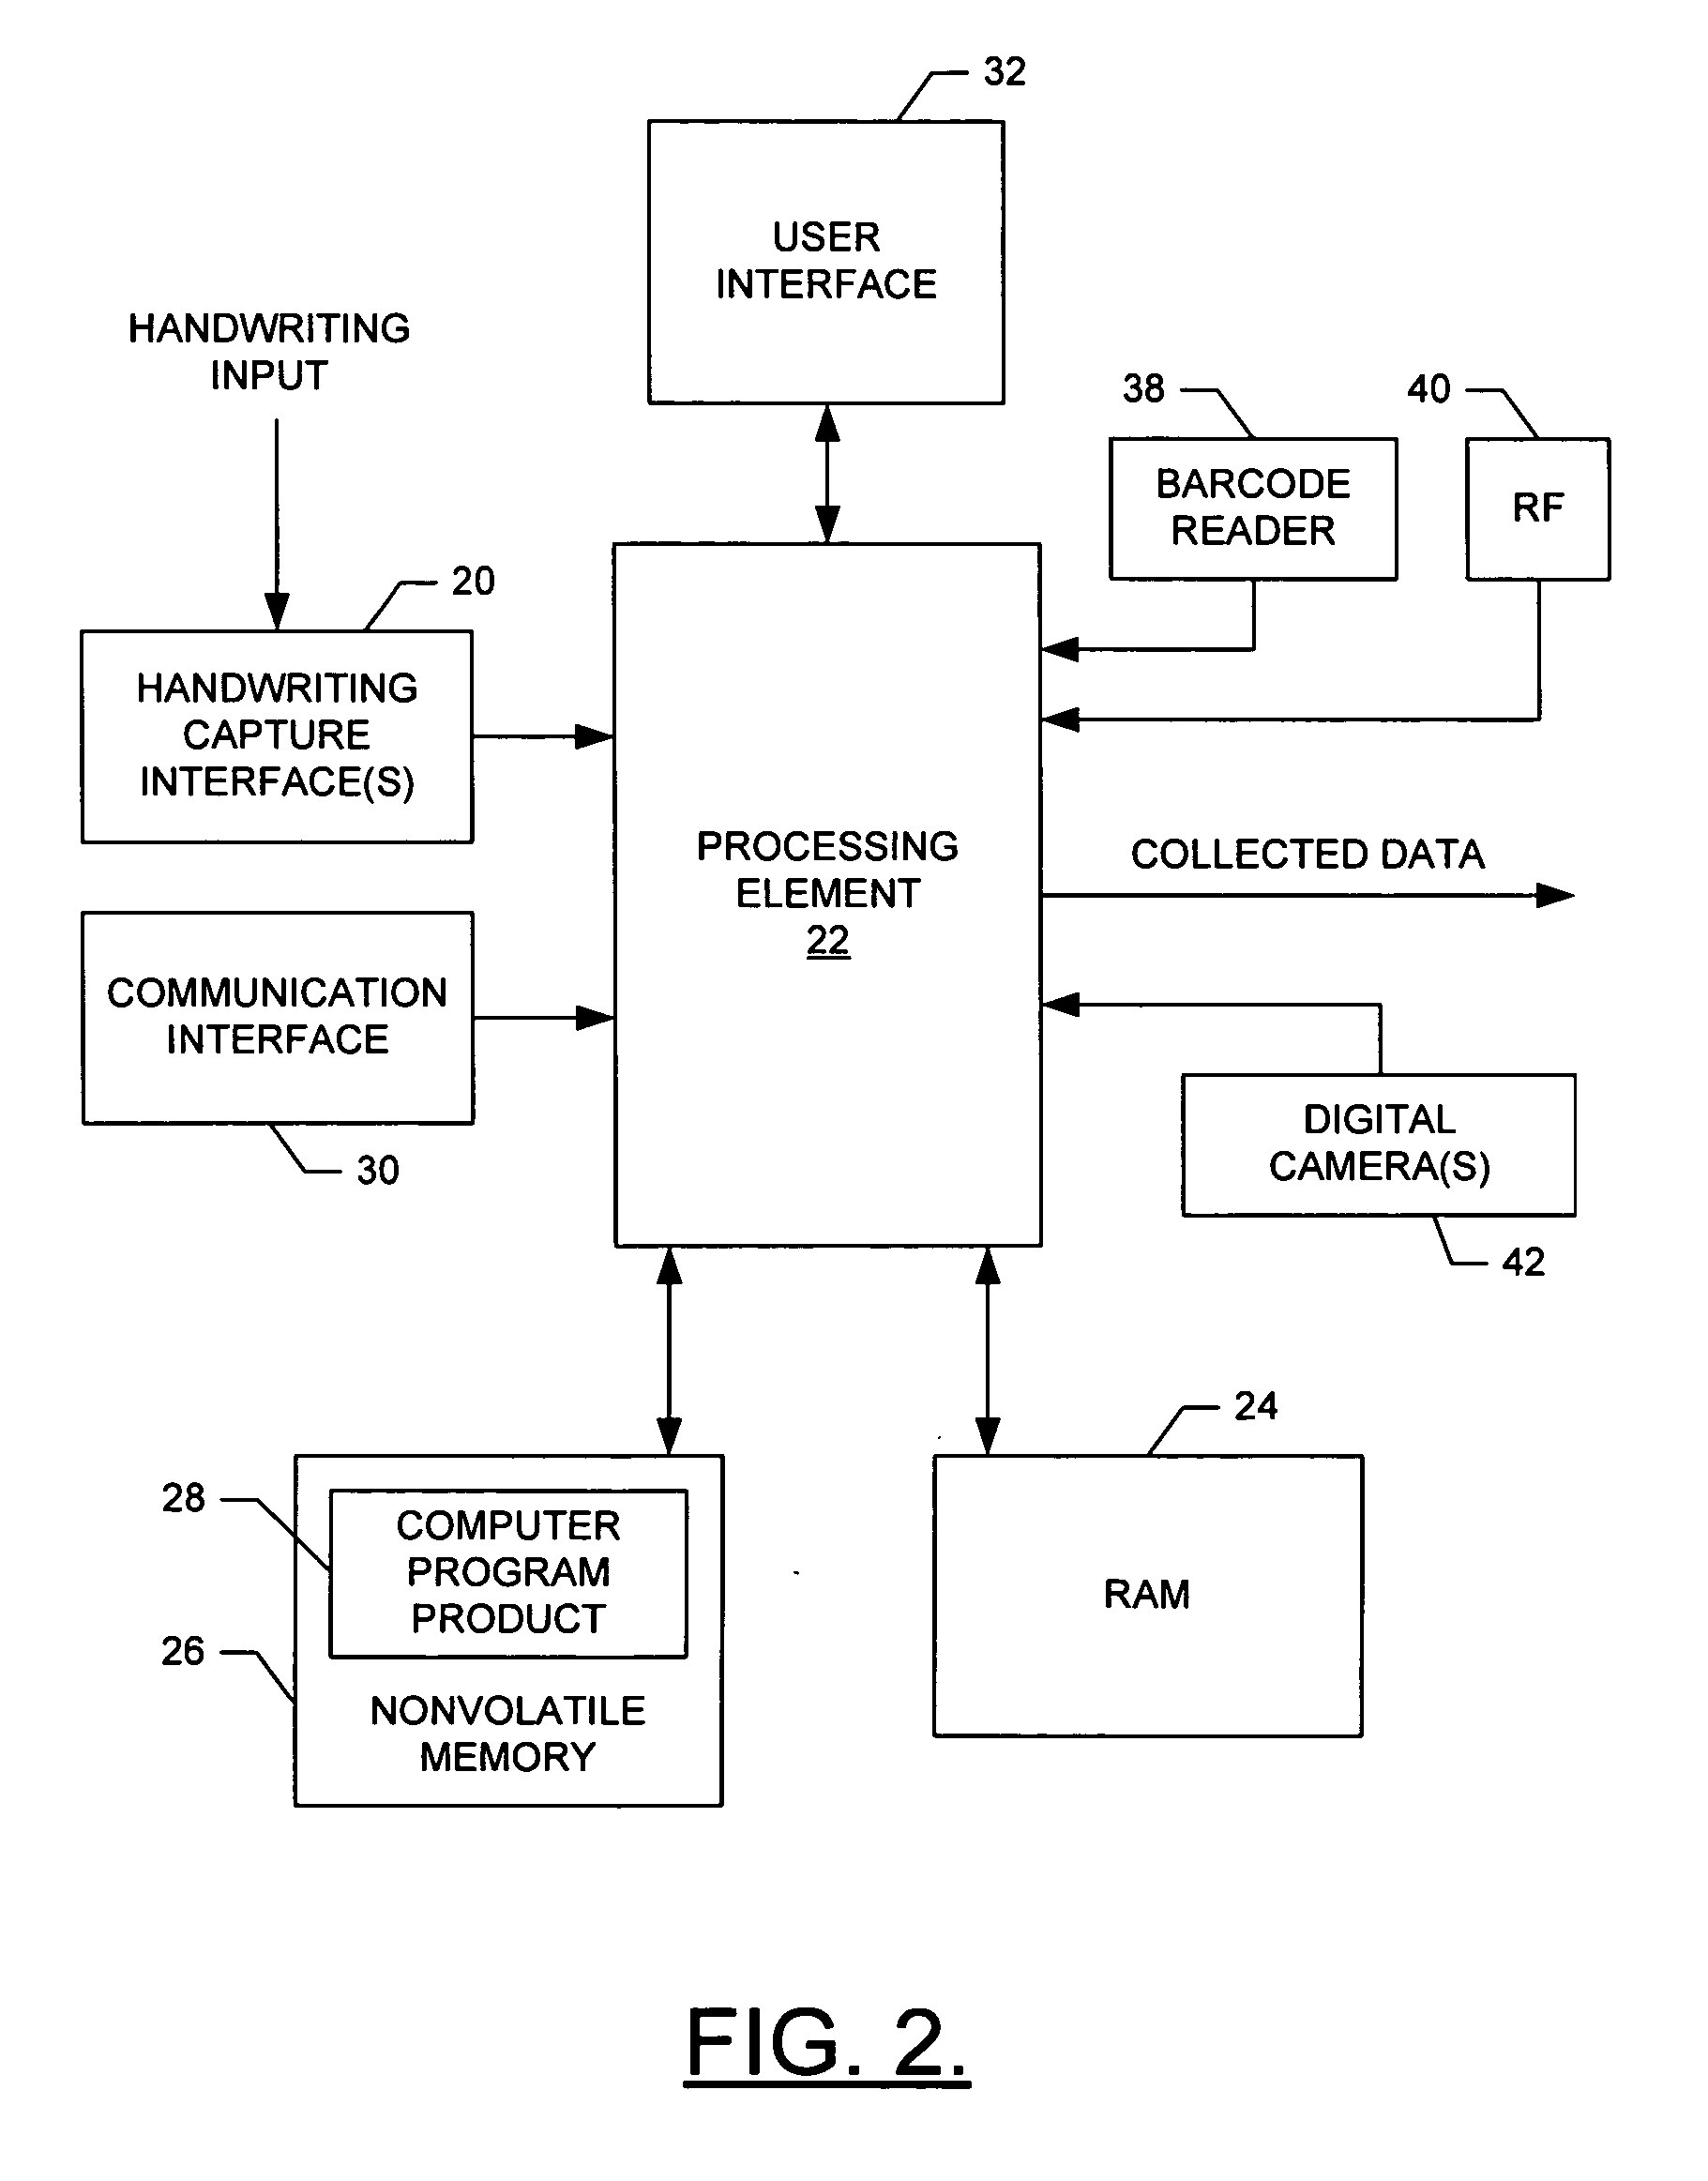 System and method for associating handwritten information with one or more objects